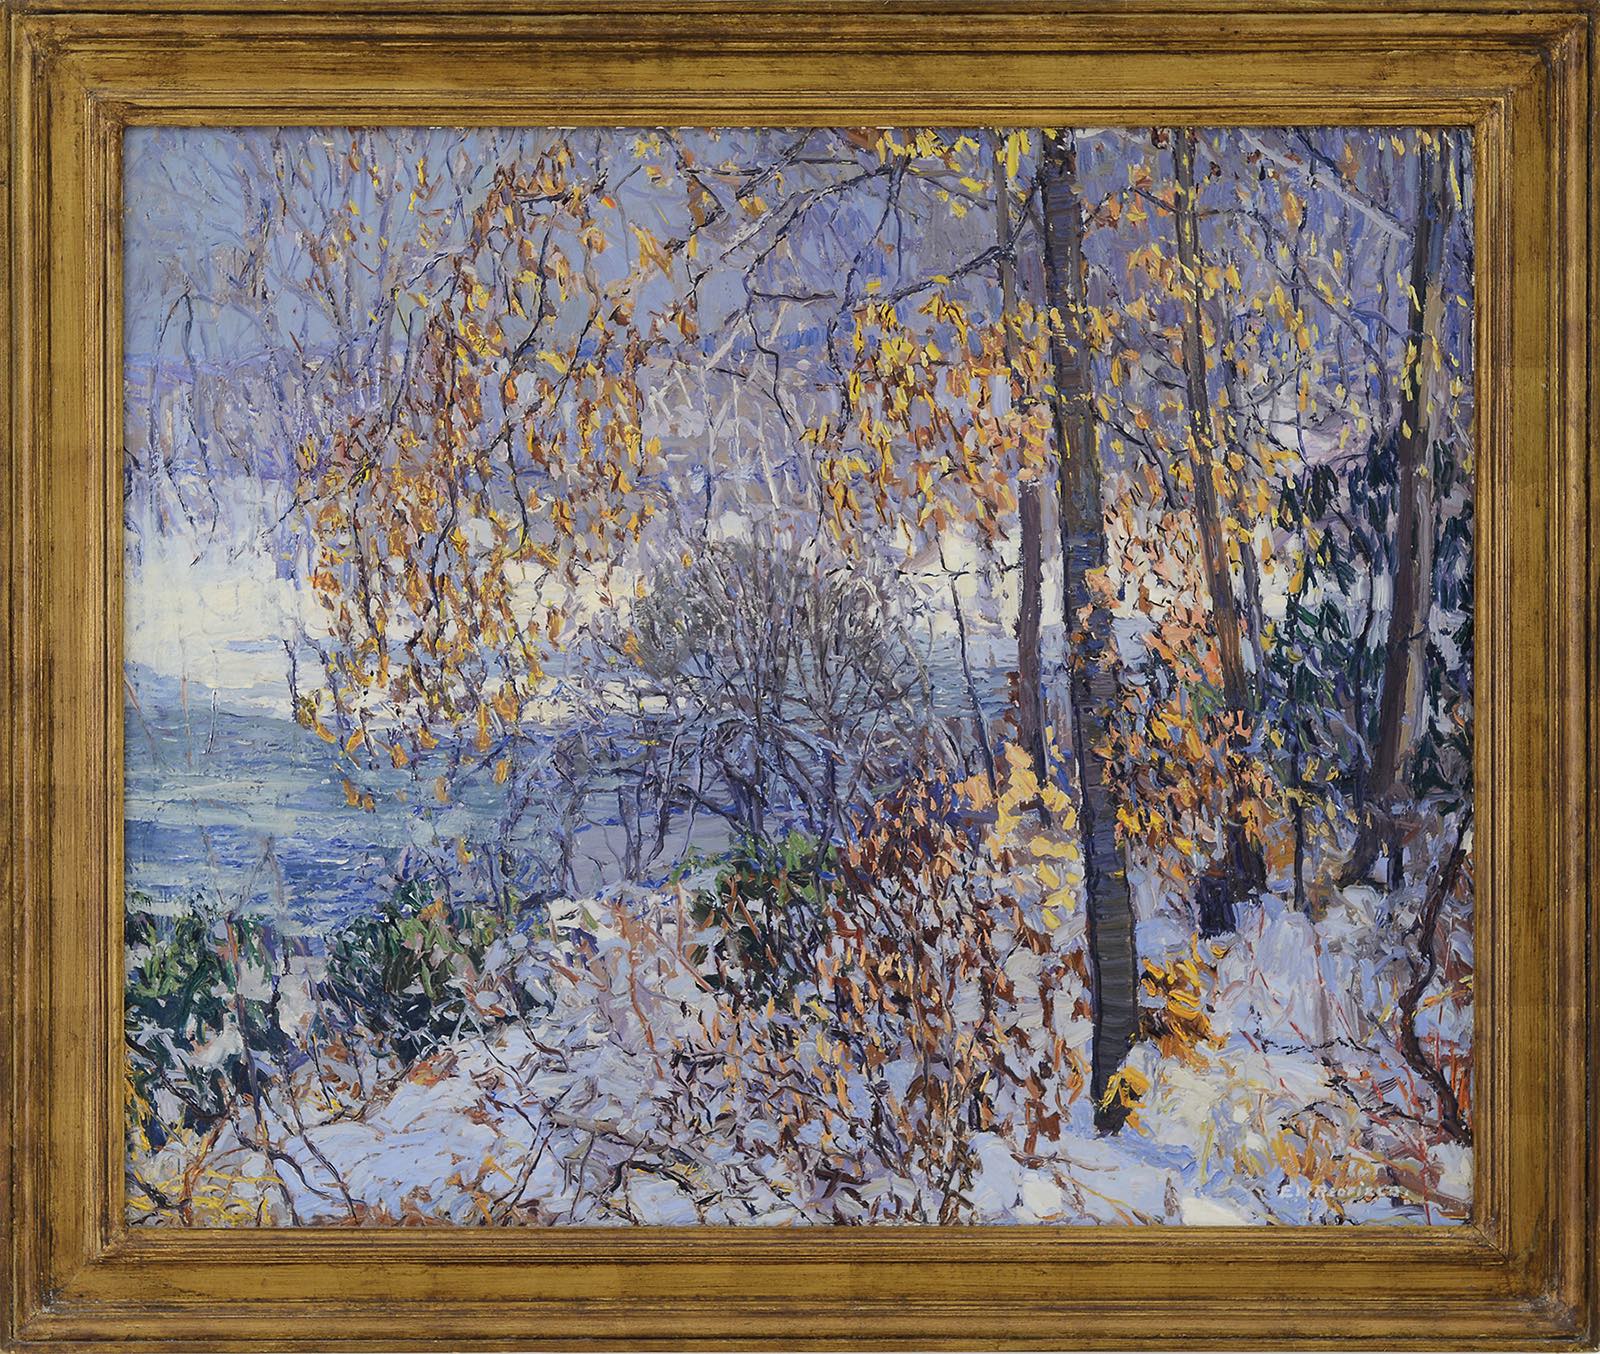 EDWARD WILLIS REDFIELD'S RIVER DECORATIONS, estimated at $80,000-120,000.